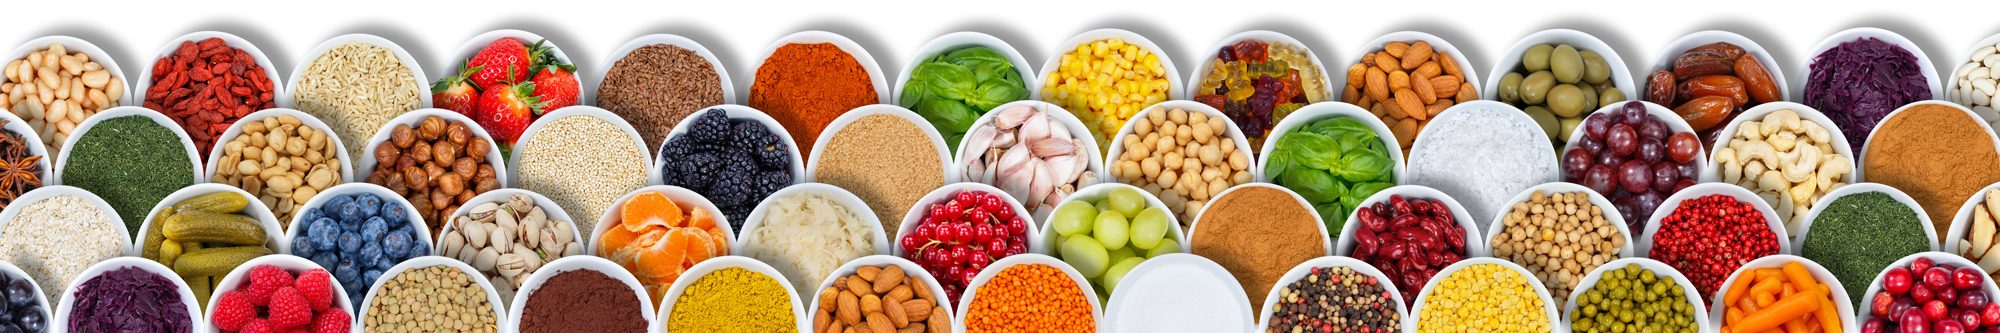 banner image of lots of bowls of food